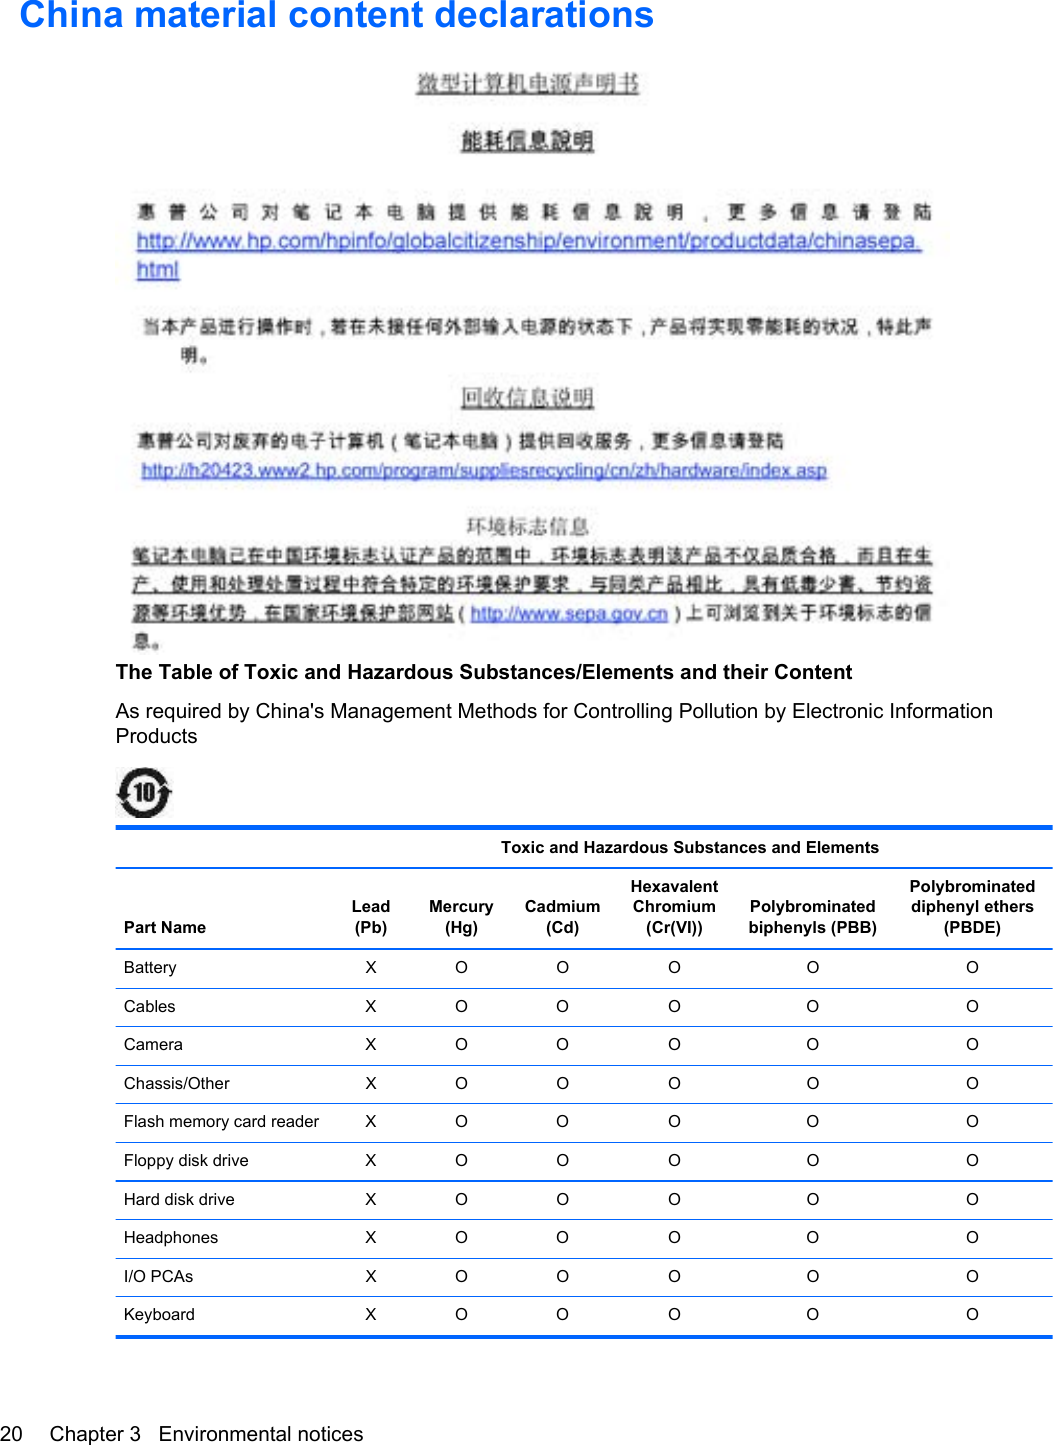 China material content declarationsThe Table of Toxic and Hazardous Substances/Elements and their ContentAs required by China&apos;s Management Methods for Controlling Pollution by Electronic InformationProducts  Toxic and Hazardous Substances and ElementsPart NameLead(Pb)Mercury(Hg)Cadmium(Cd)HexavalentChromium(Cr(VI))Polybrominatedbiphenyls (PBB)Polybrominateddiphenyl ethers(PBDE)Battery X O O O O OCables X O O O O OCamera X O O O O OChassis/Other X O O O O OFlash memory card reader X O O O O OFloppy disk drive X O O O O OHard disk drive X O O O O OHeadphones X O O O O OI/O PCAs X O O O O OKeyboard X O O O O O20 Chapter 3   Environmental notices